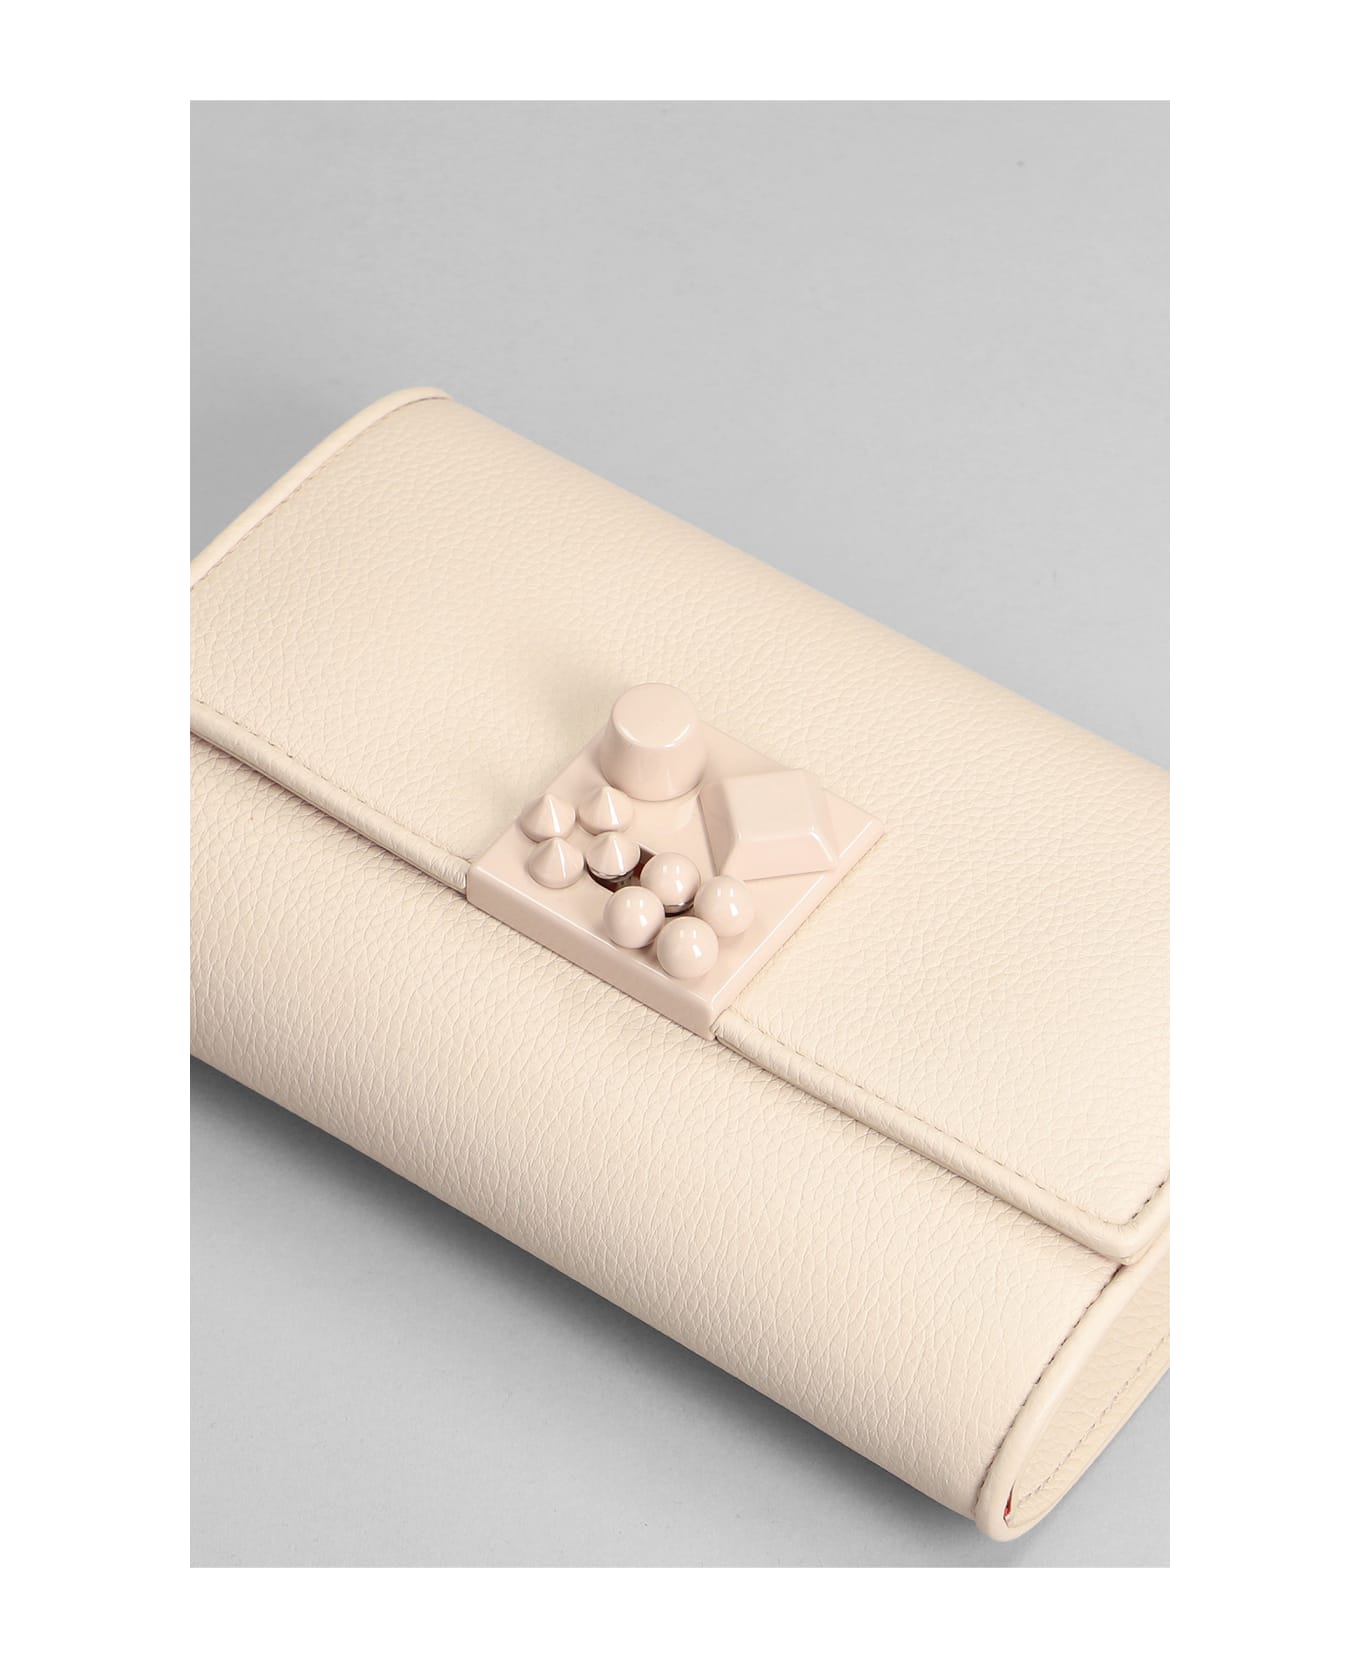 Christian Louboutin Carasky Shoulder Bag In Powder Leather - powder クラッチバッグ